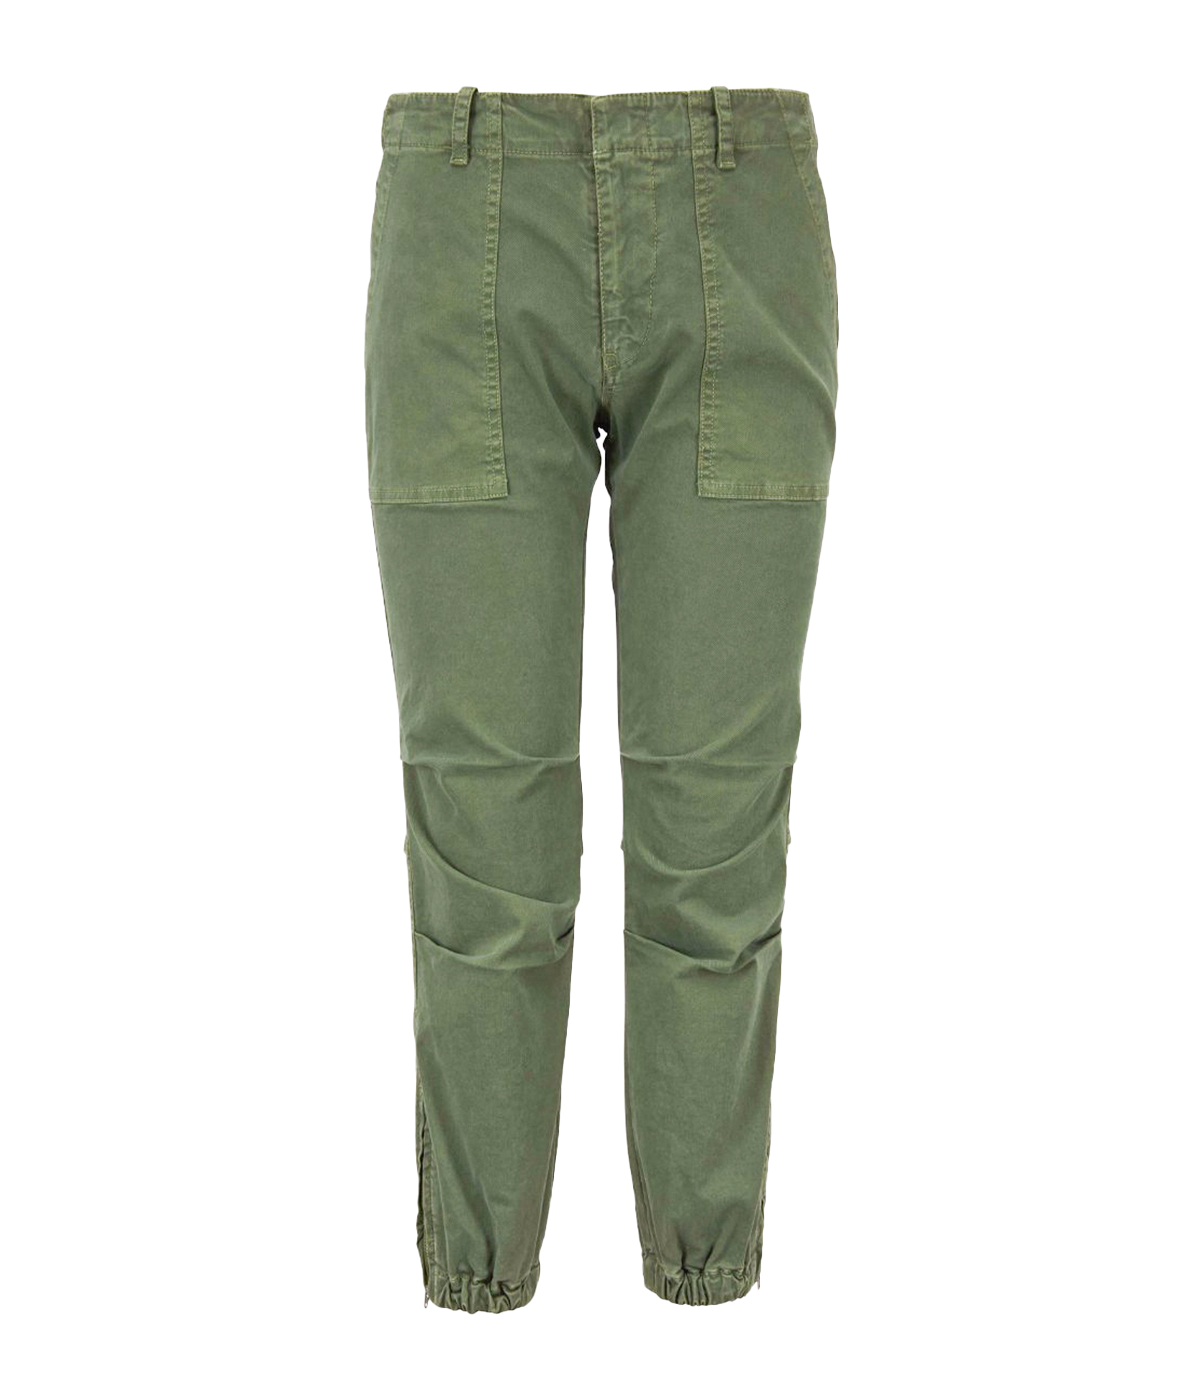 Cropped Military Pants in Camo Green